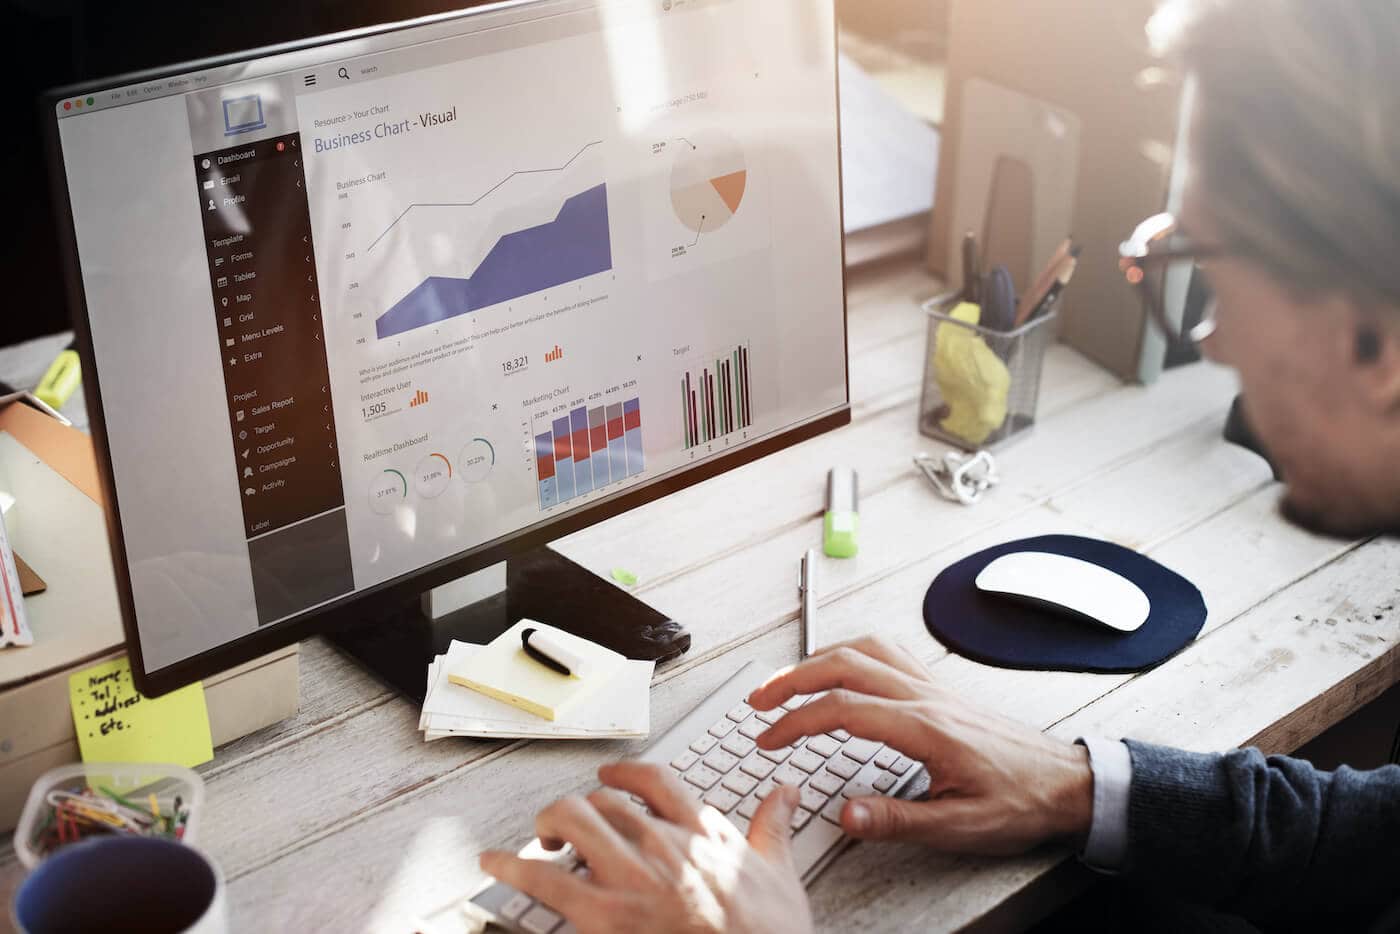 What Are The Benefits Of Real Time Analytics In Business?